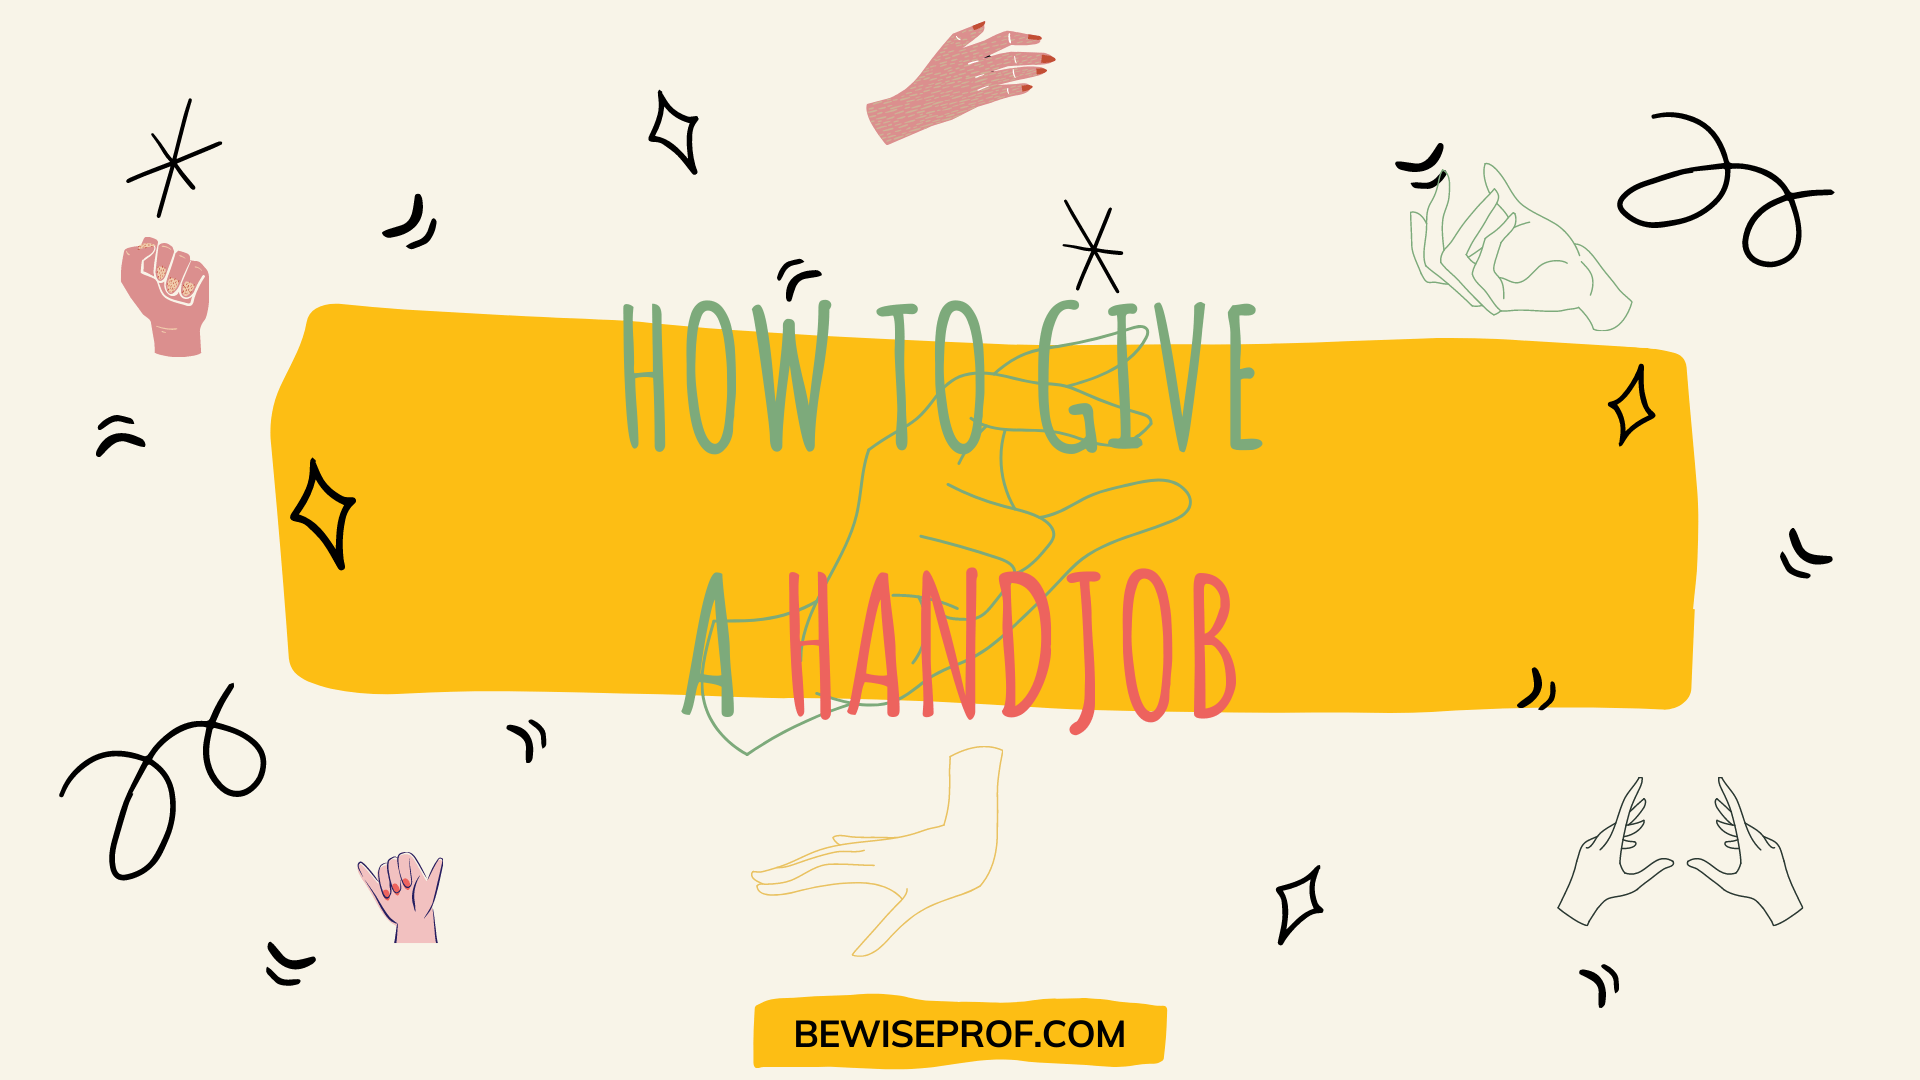 how-to-give-a-hand-job-be-wise-professor